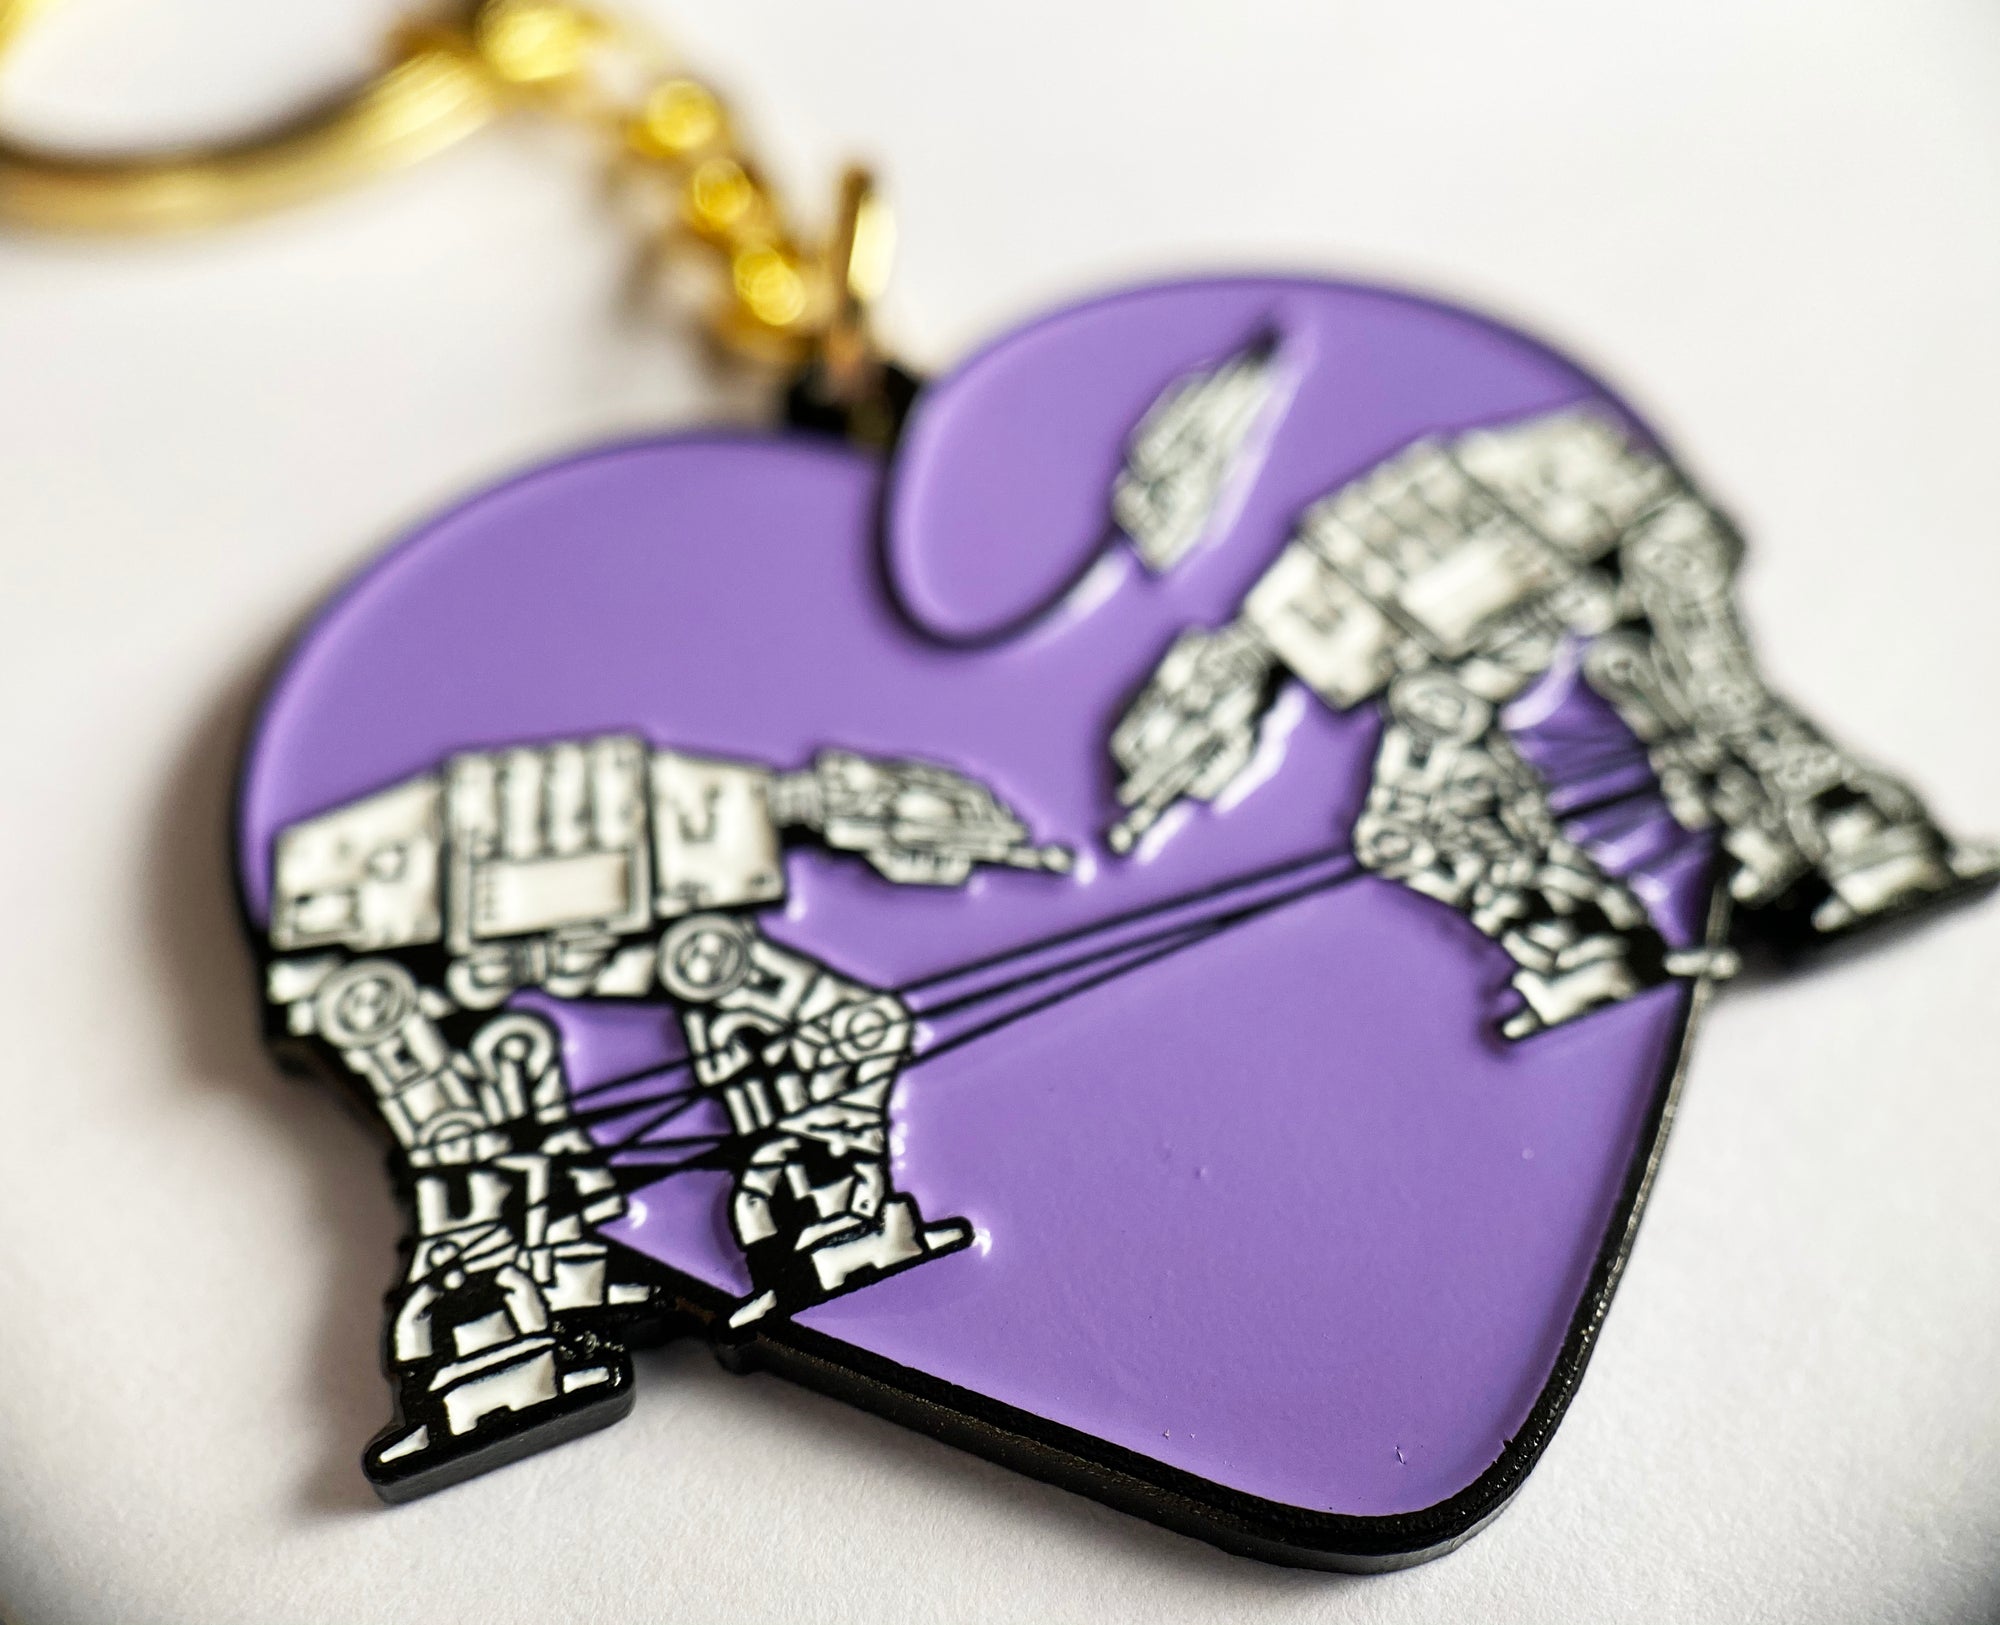 Keychain: Love AT-AT First Sight - Purple